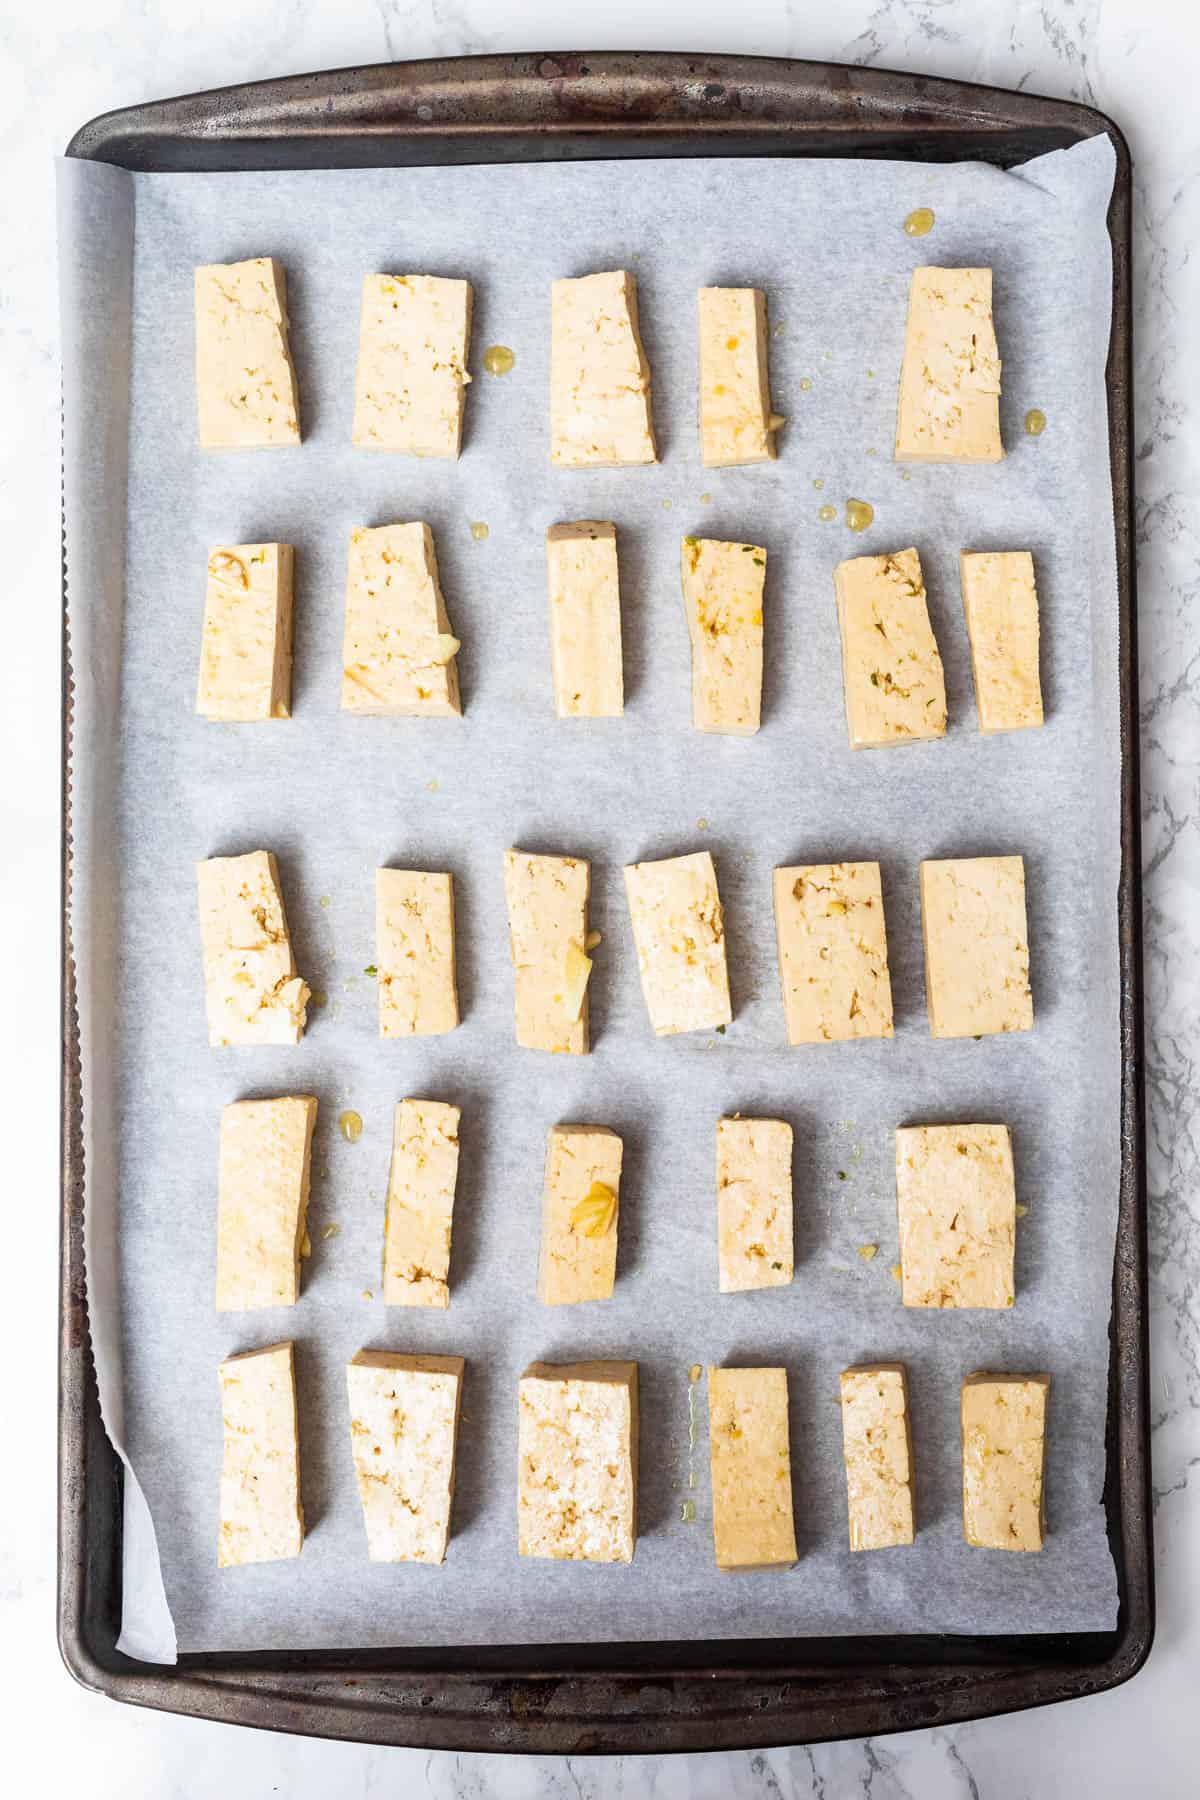 Raw pieces of tofu on parchment paper on baking sheet